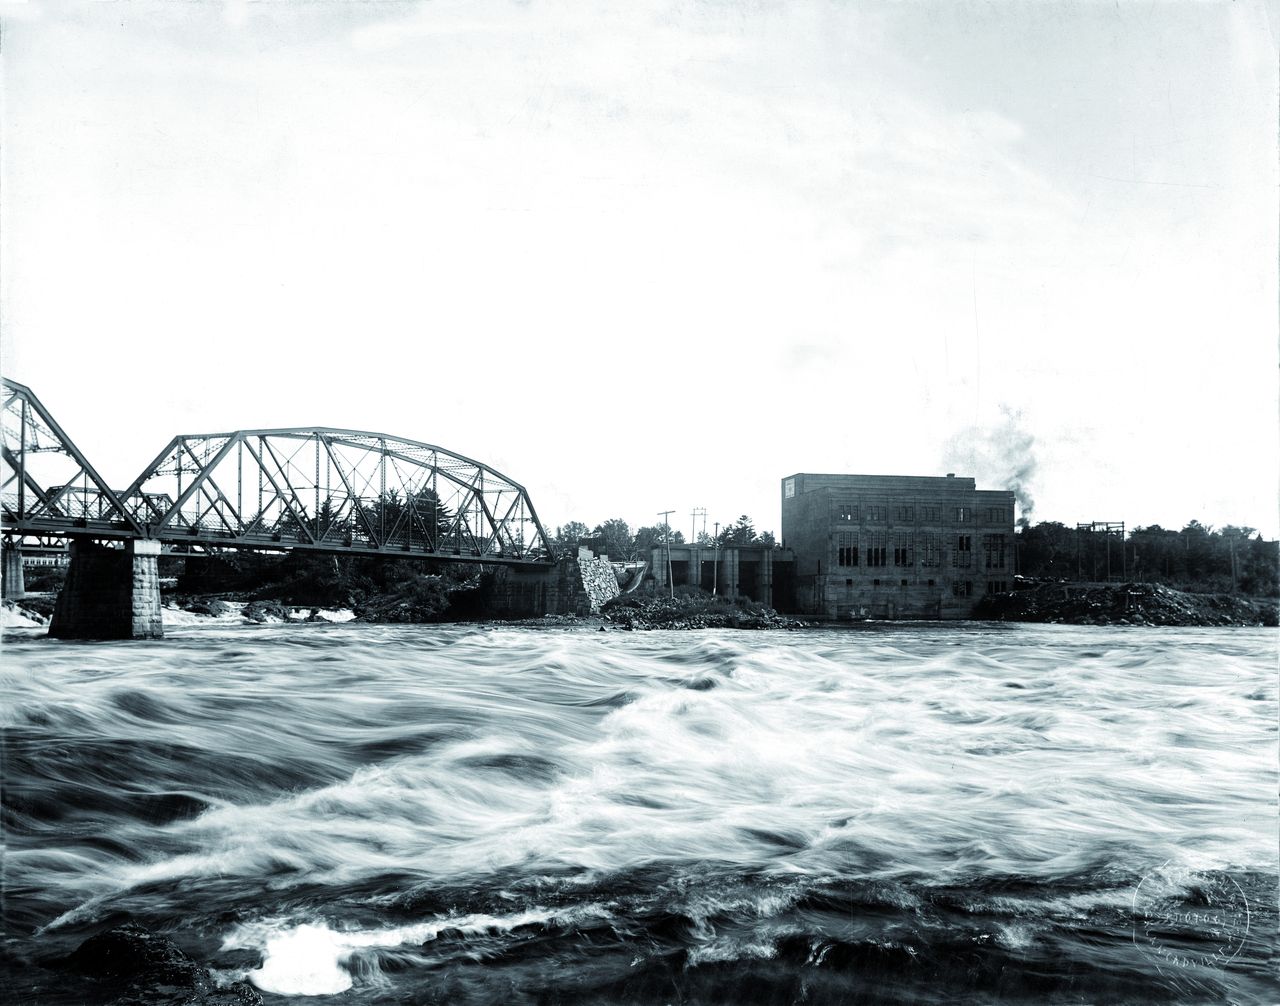 Black and white photograph of the Drummondville hydroelectric power plant and the two bridges crossing the Saint Francis River.